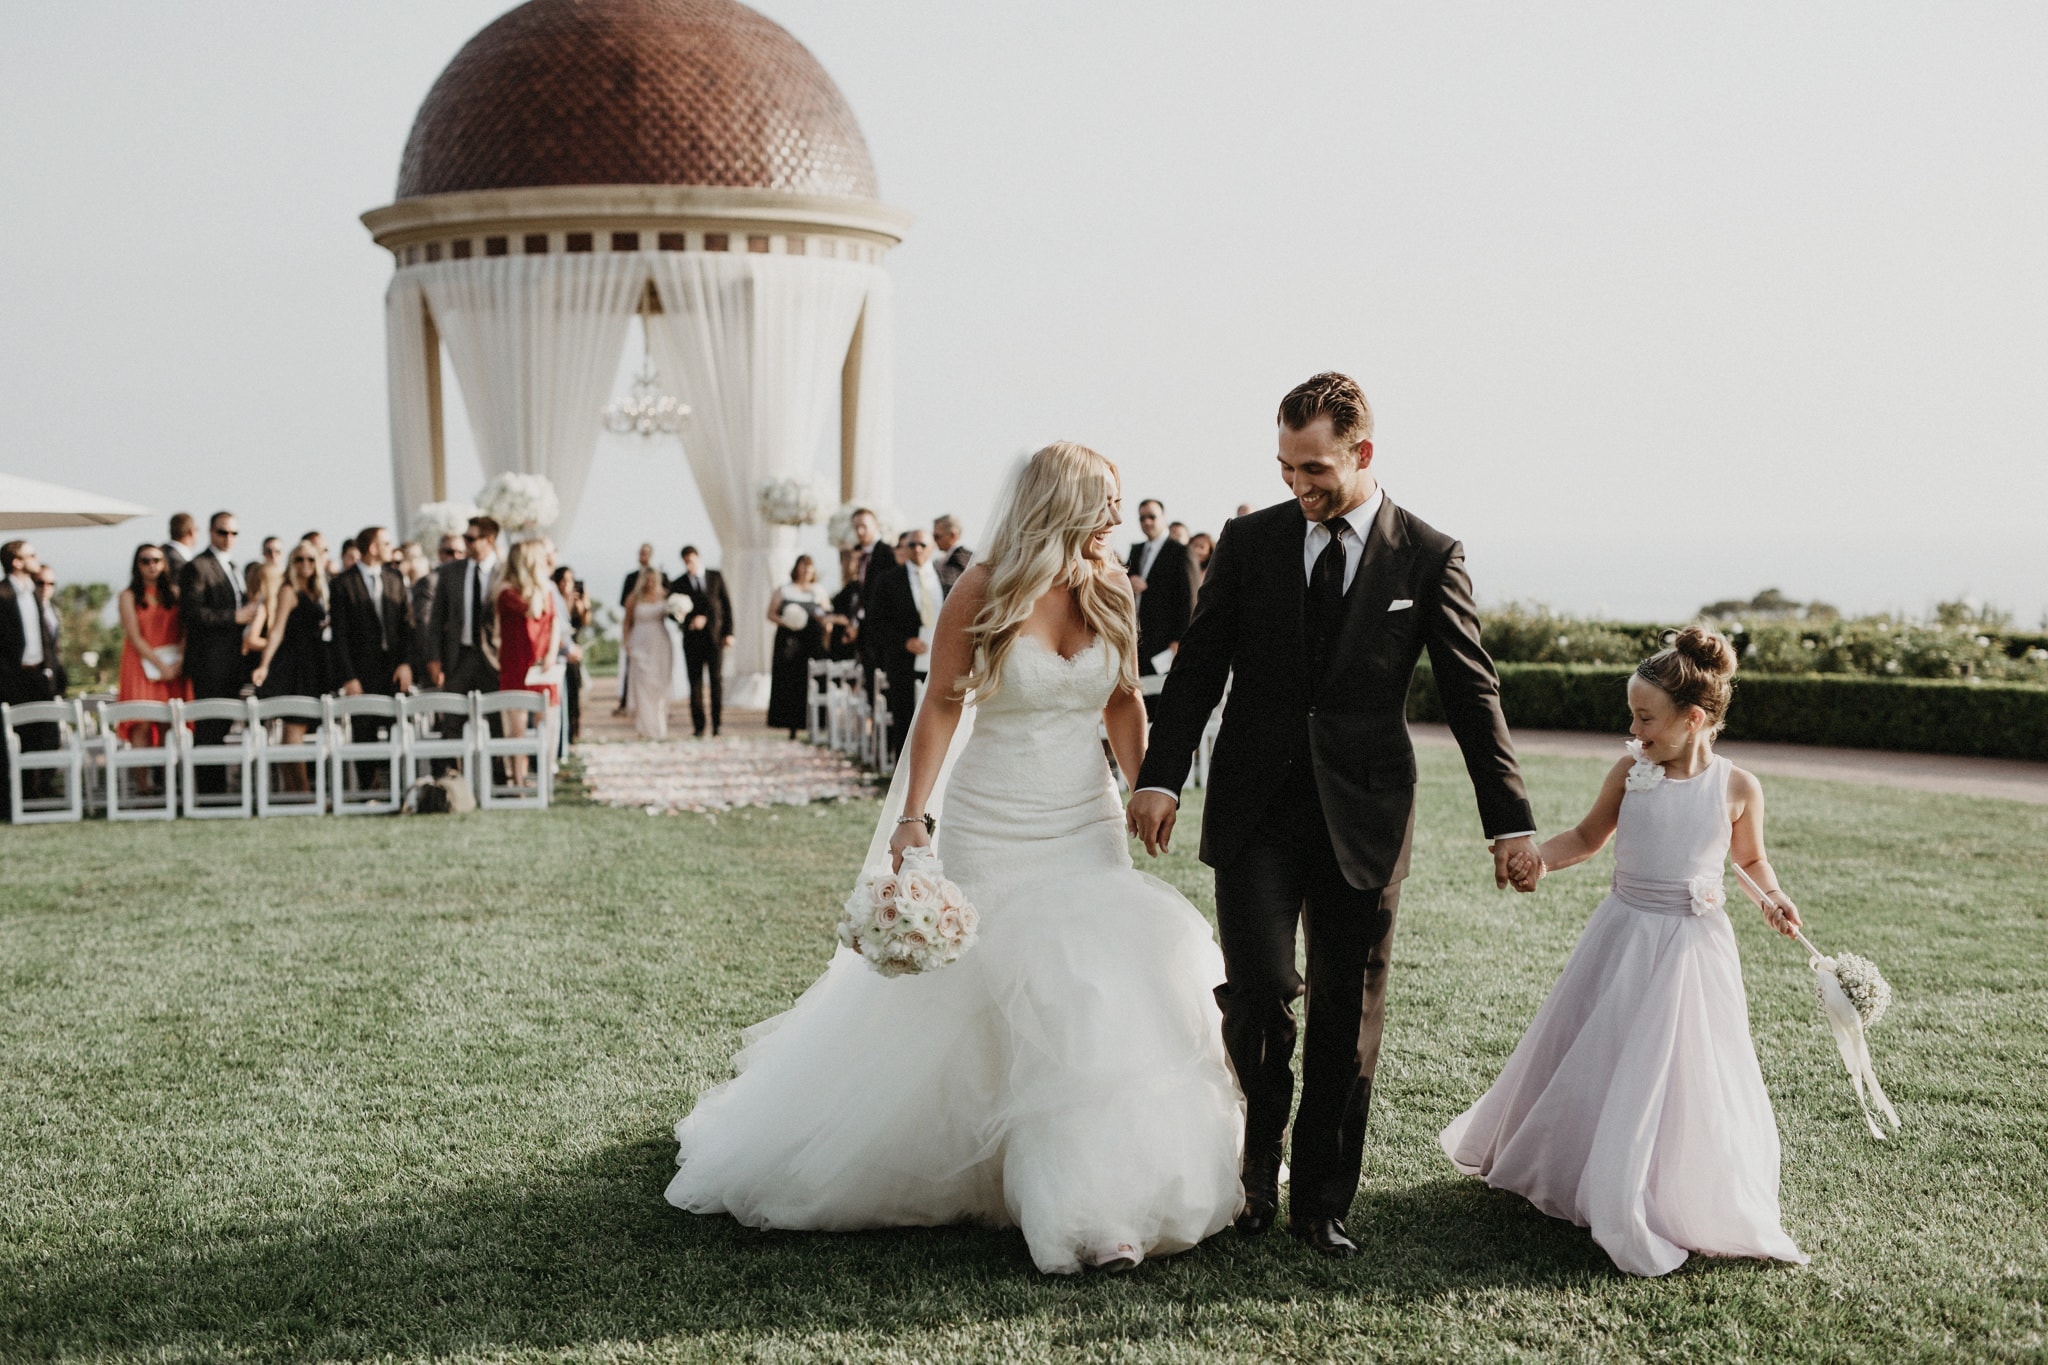 A bride, groom, and flower girl walk hand in hand together at a beautiful Newport Beach wedding at The Resort at Pelican Hill.